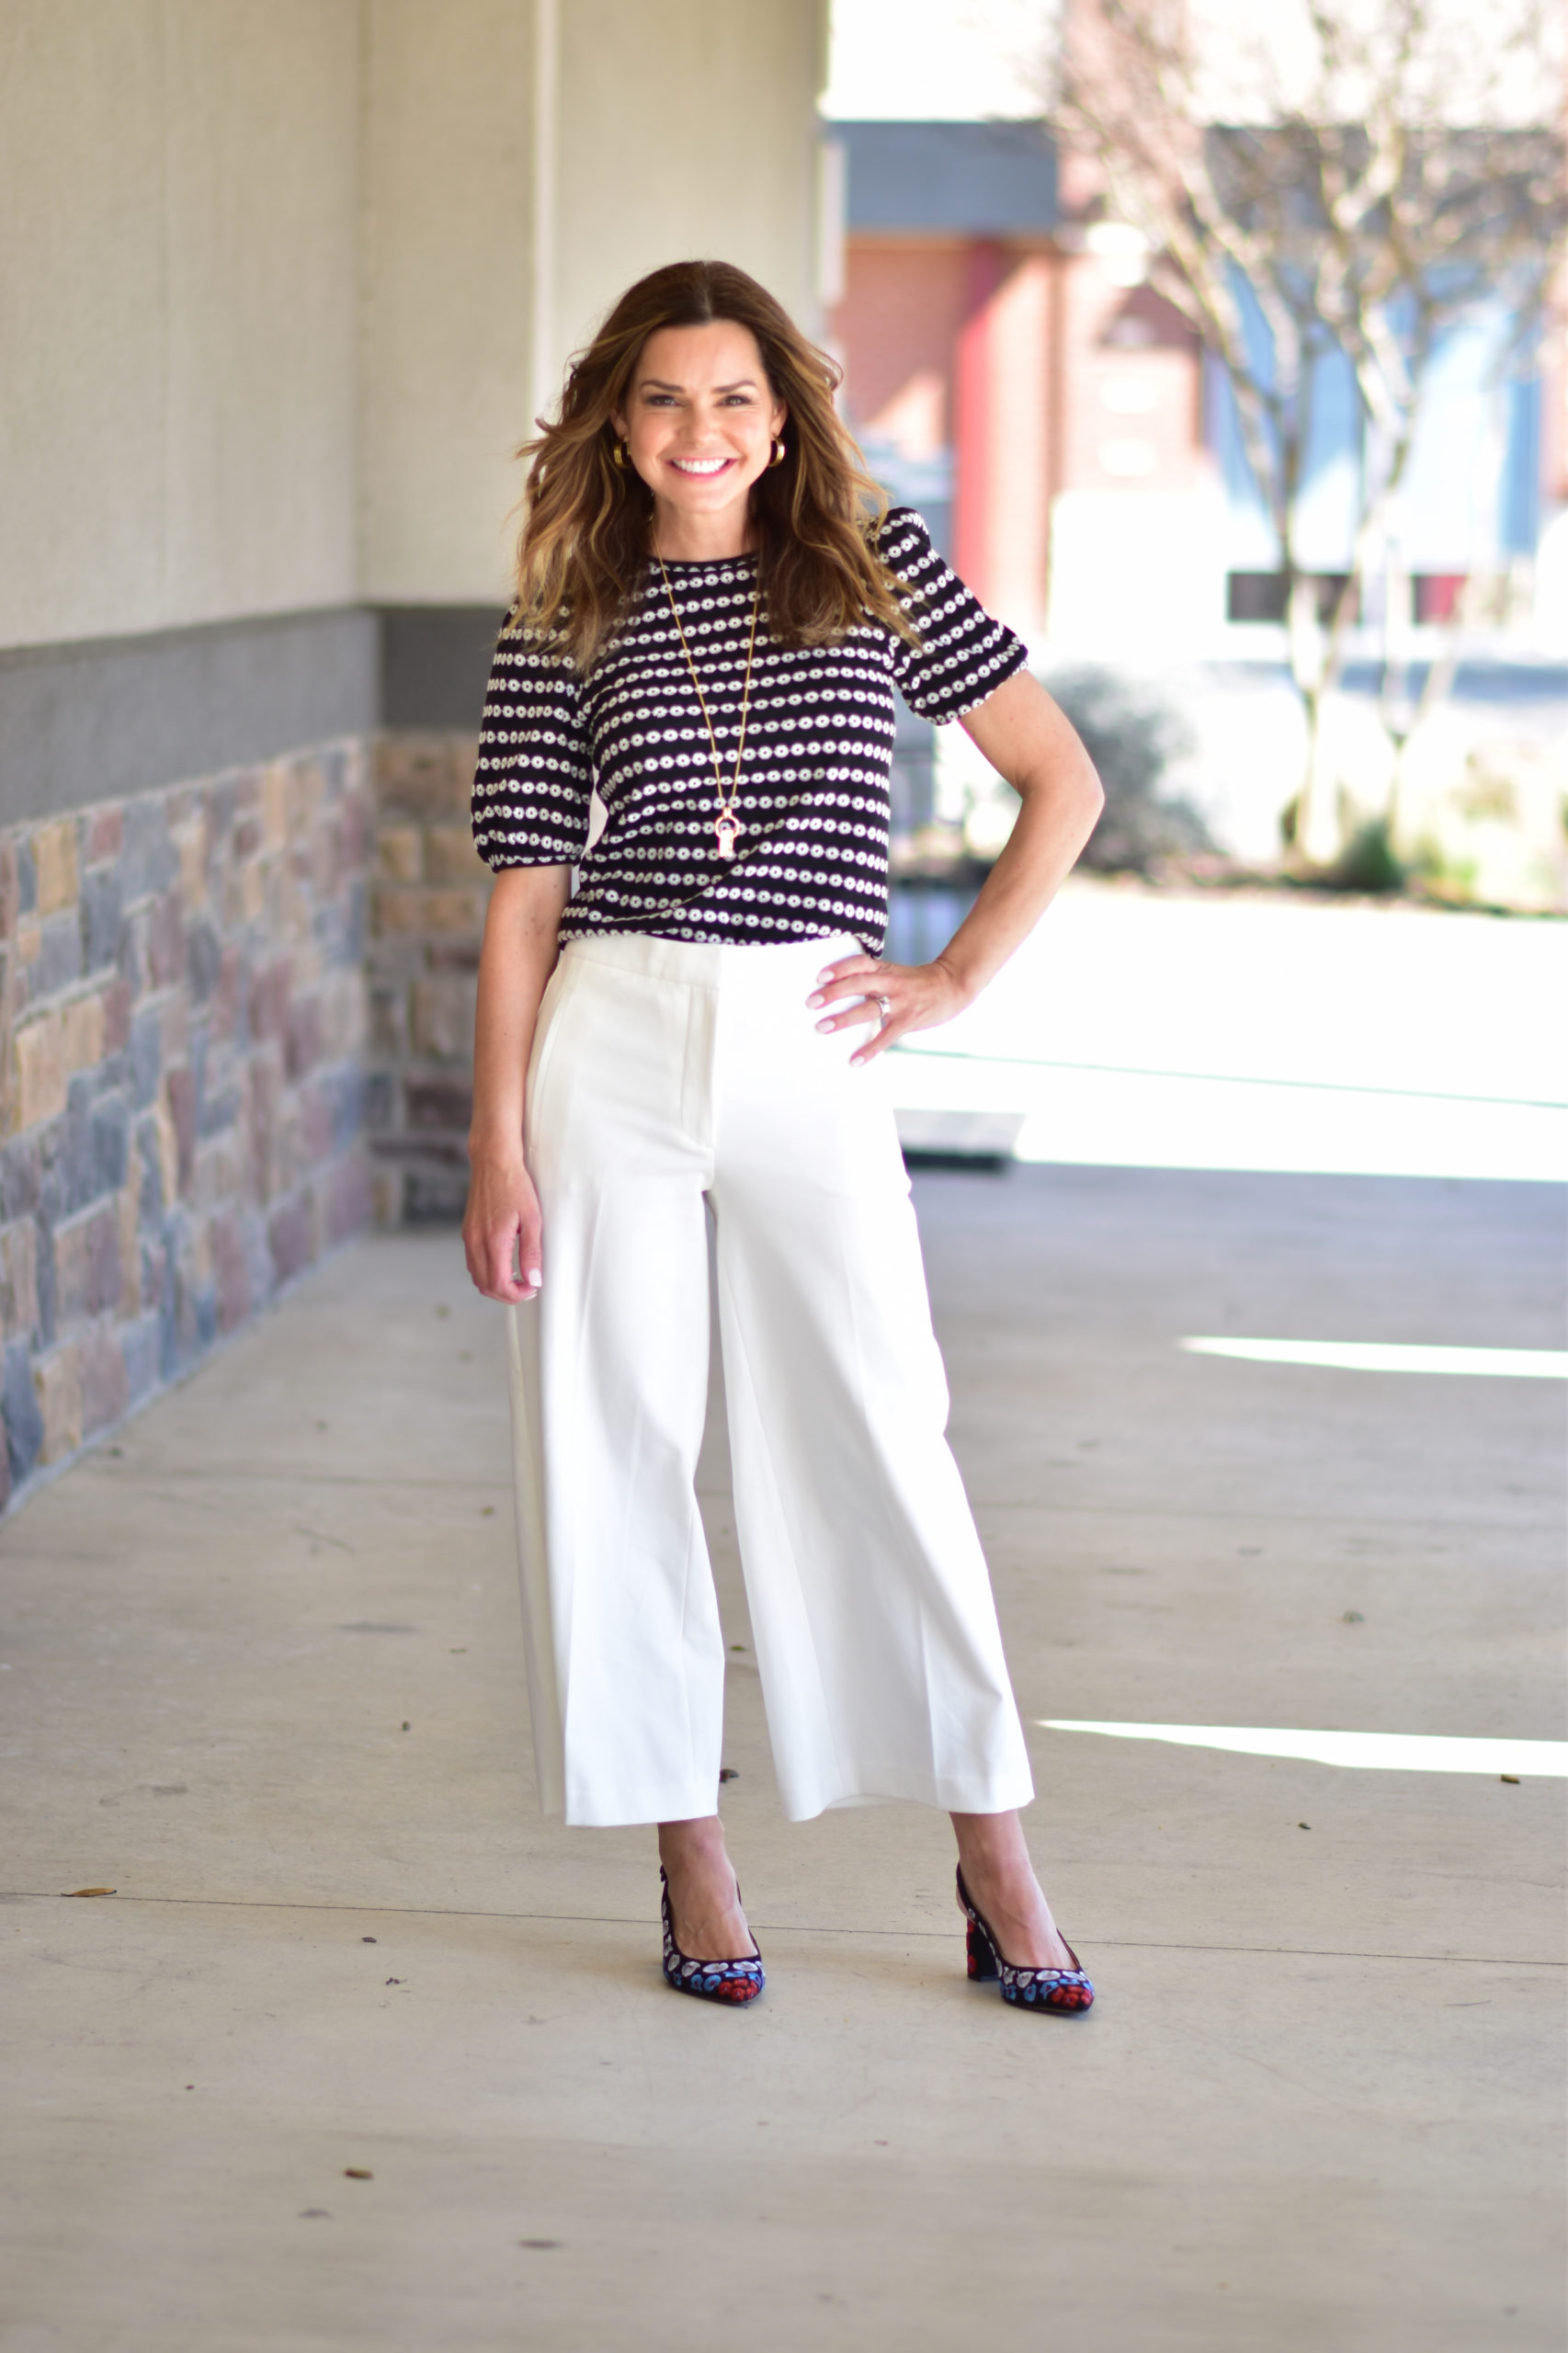 Wide Leg Pants with Loafers Outfits (21 ideas & outfits)